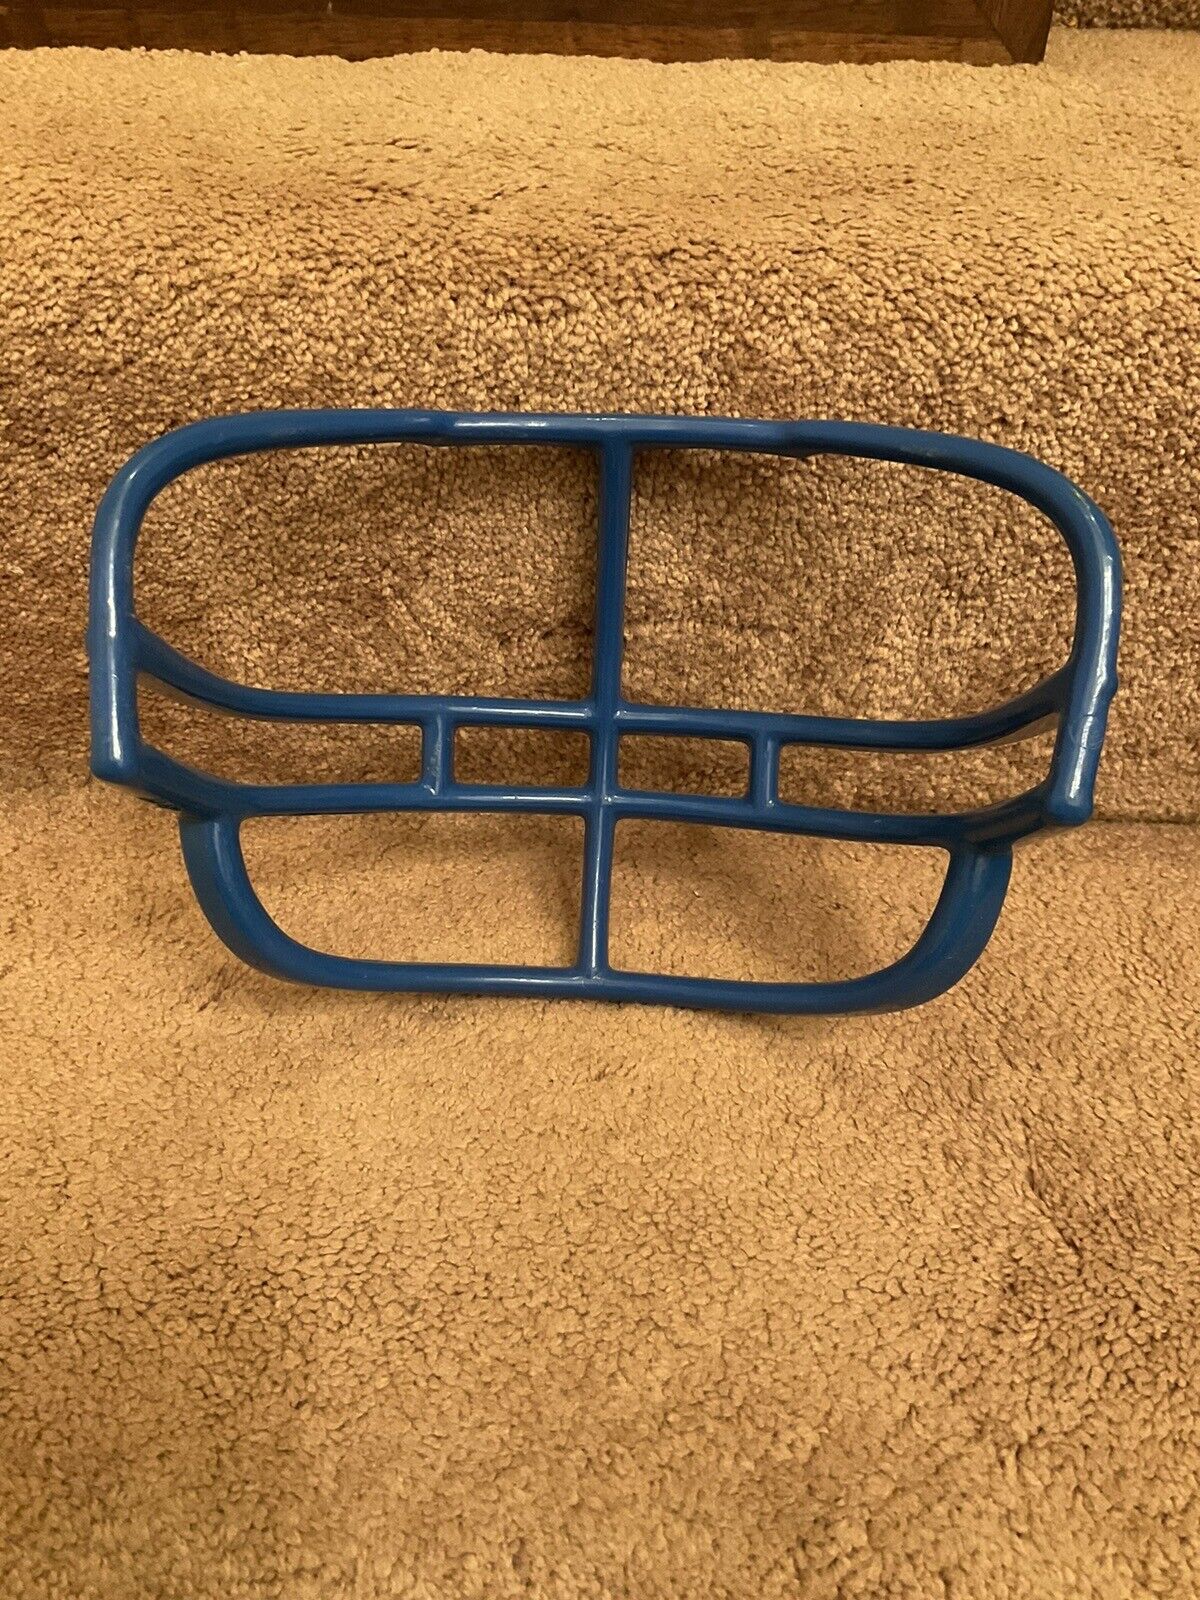 Vintage Blue RIddell 1990s DoubleWire Kra-Lite NOP Football Helmet Facemask Sporting Goods:Team Sports:Football:Clothing, Shoes & Accessories:Helmets & Hats Riddell   